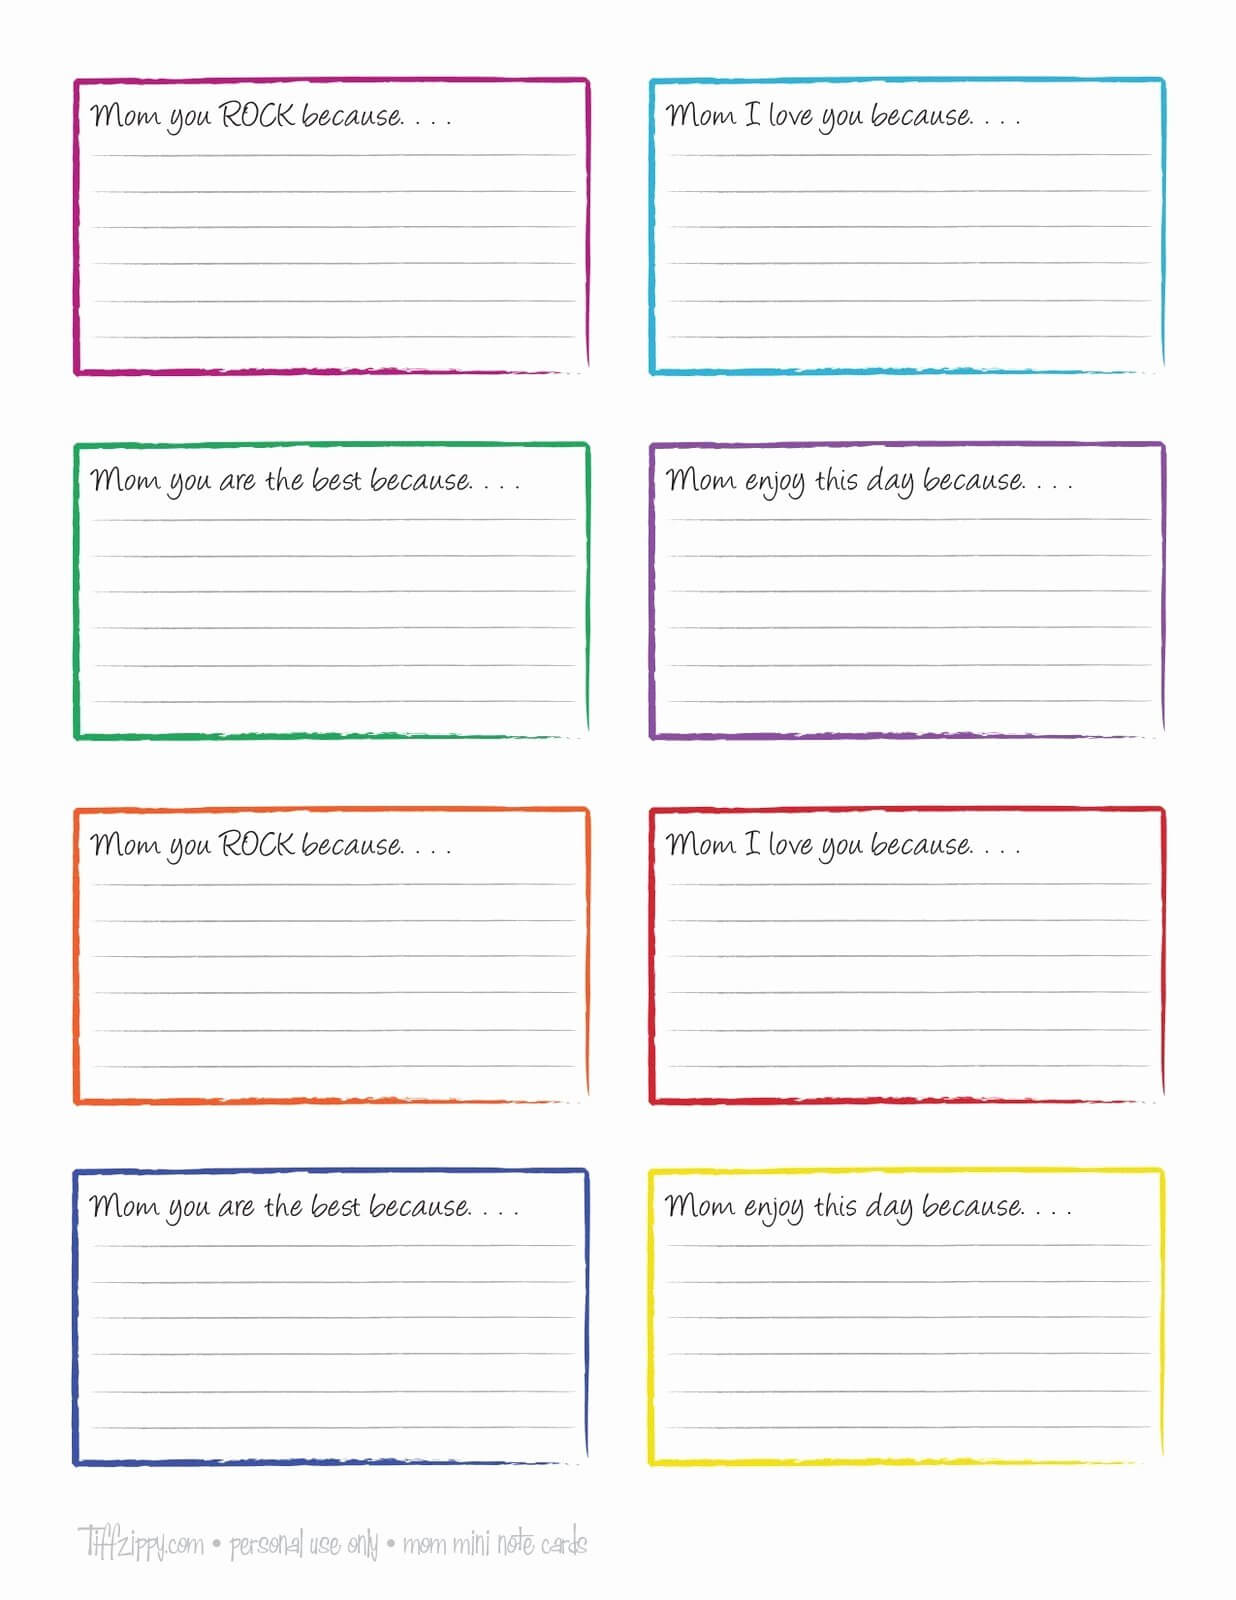 Word Template For Note Cards – Dalep.midnightpig.co Intended For 5 By 8 Index Card Template